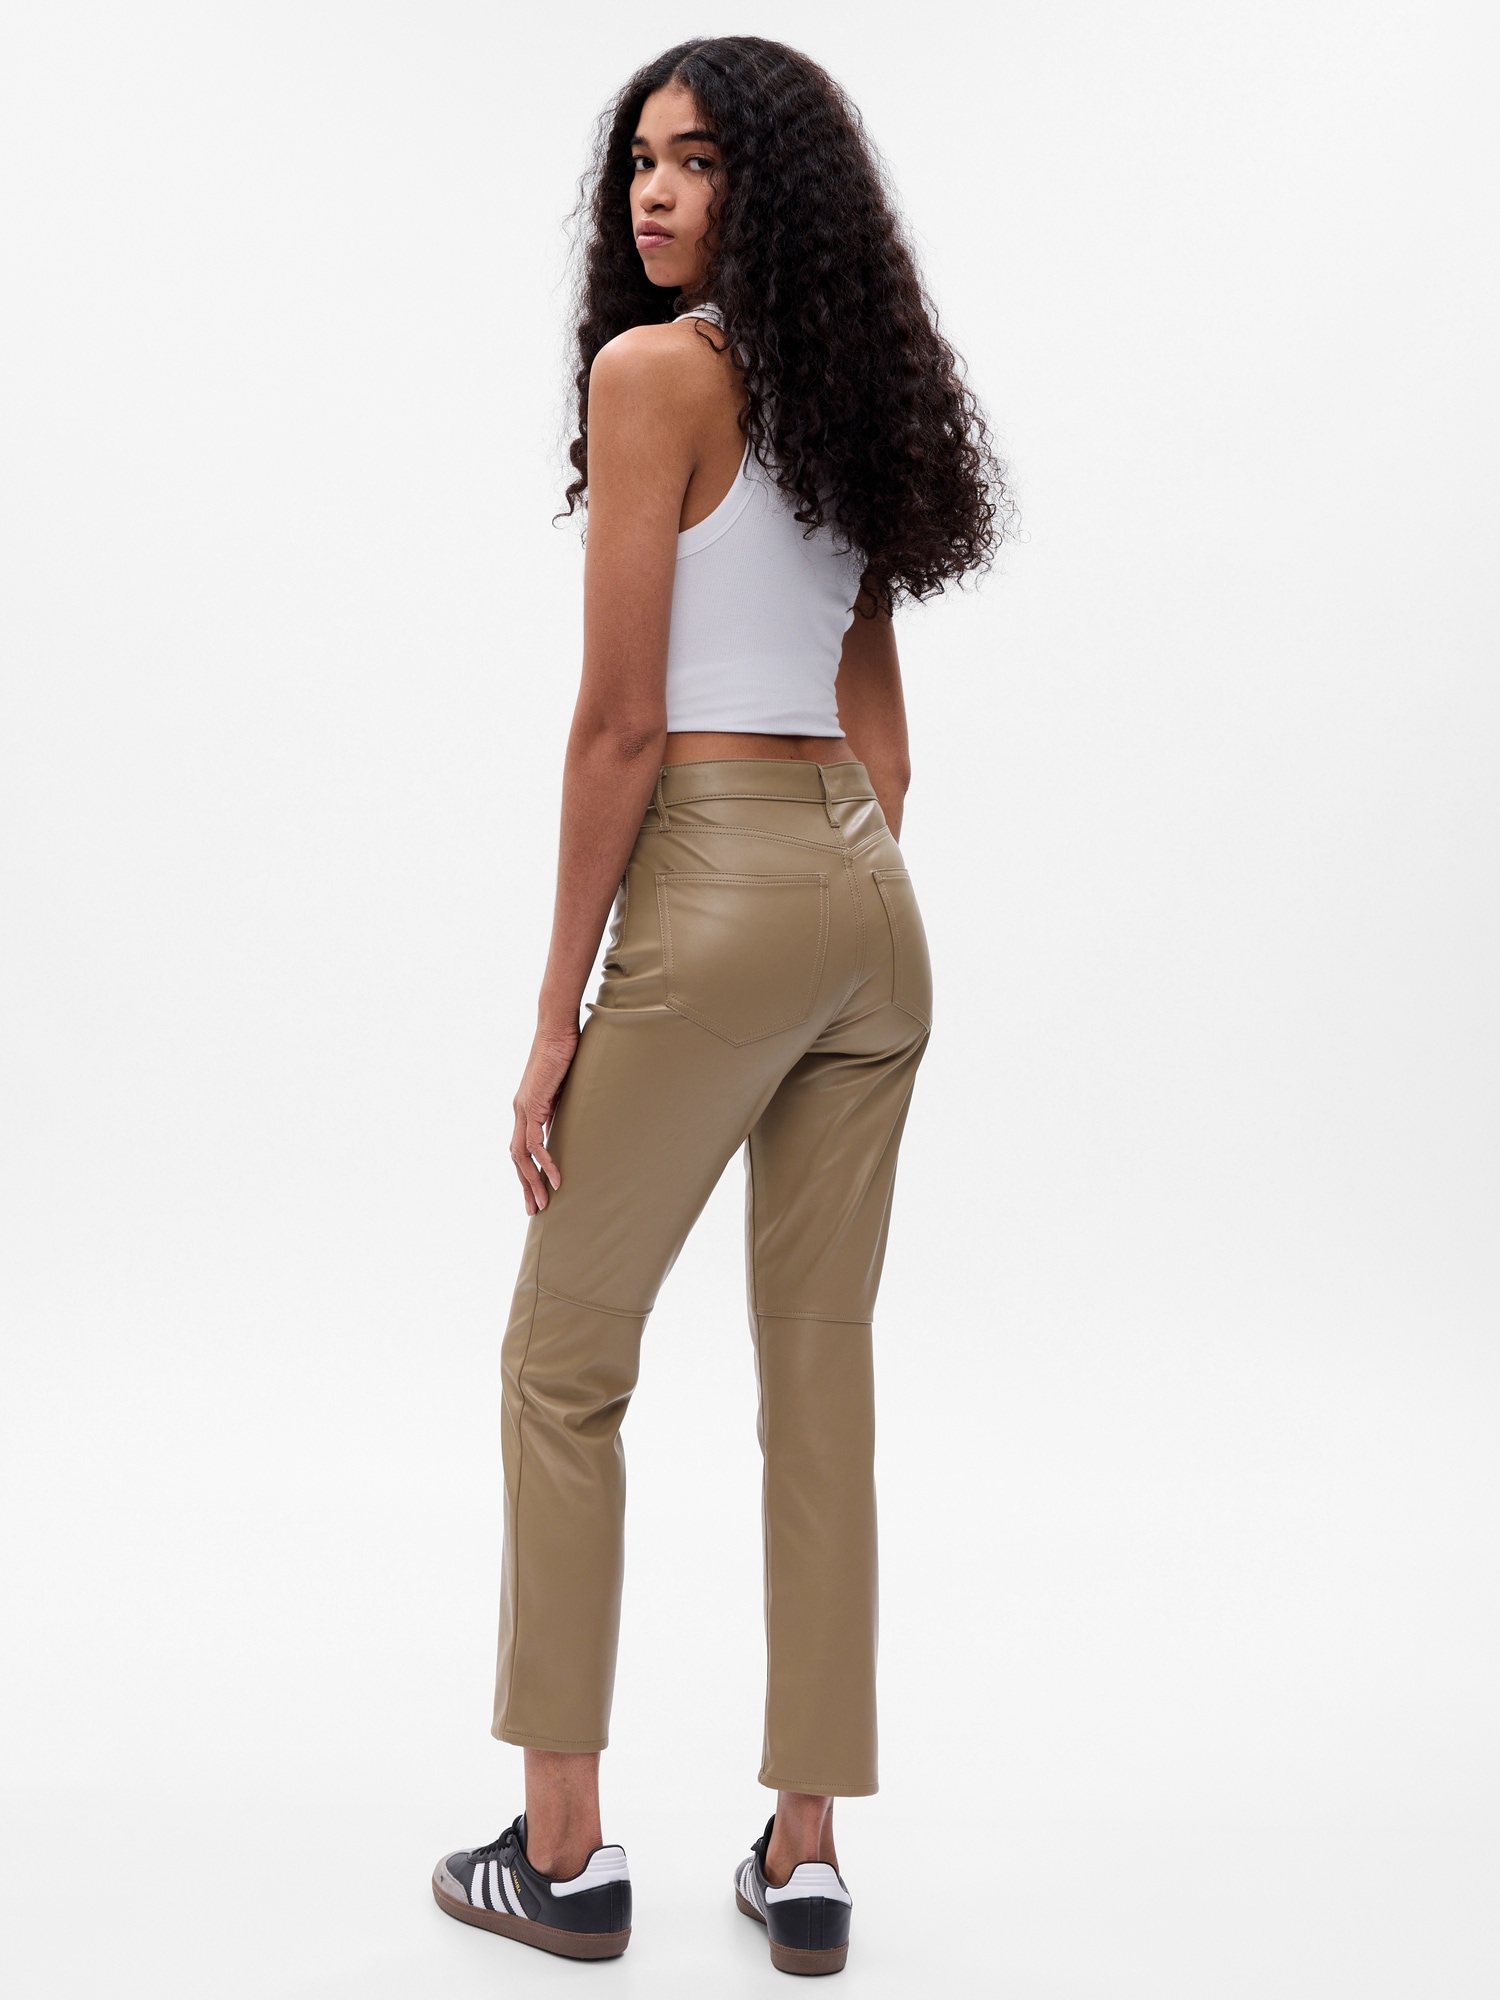 High Waisted--Vintage Style Hollywood Pants